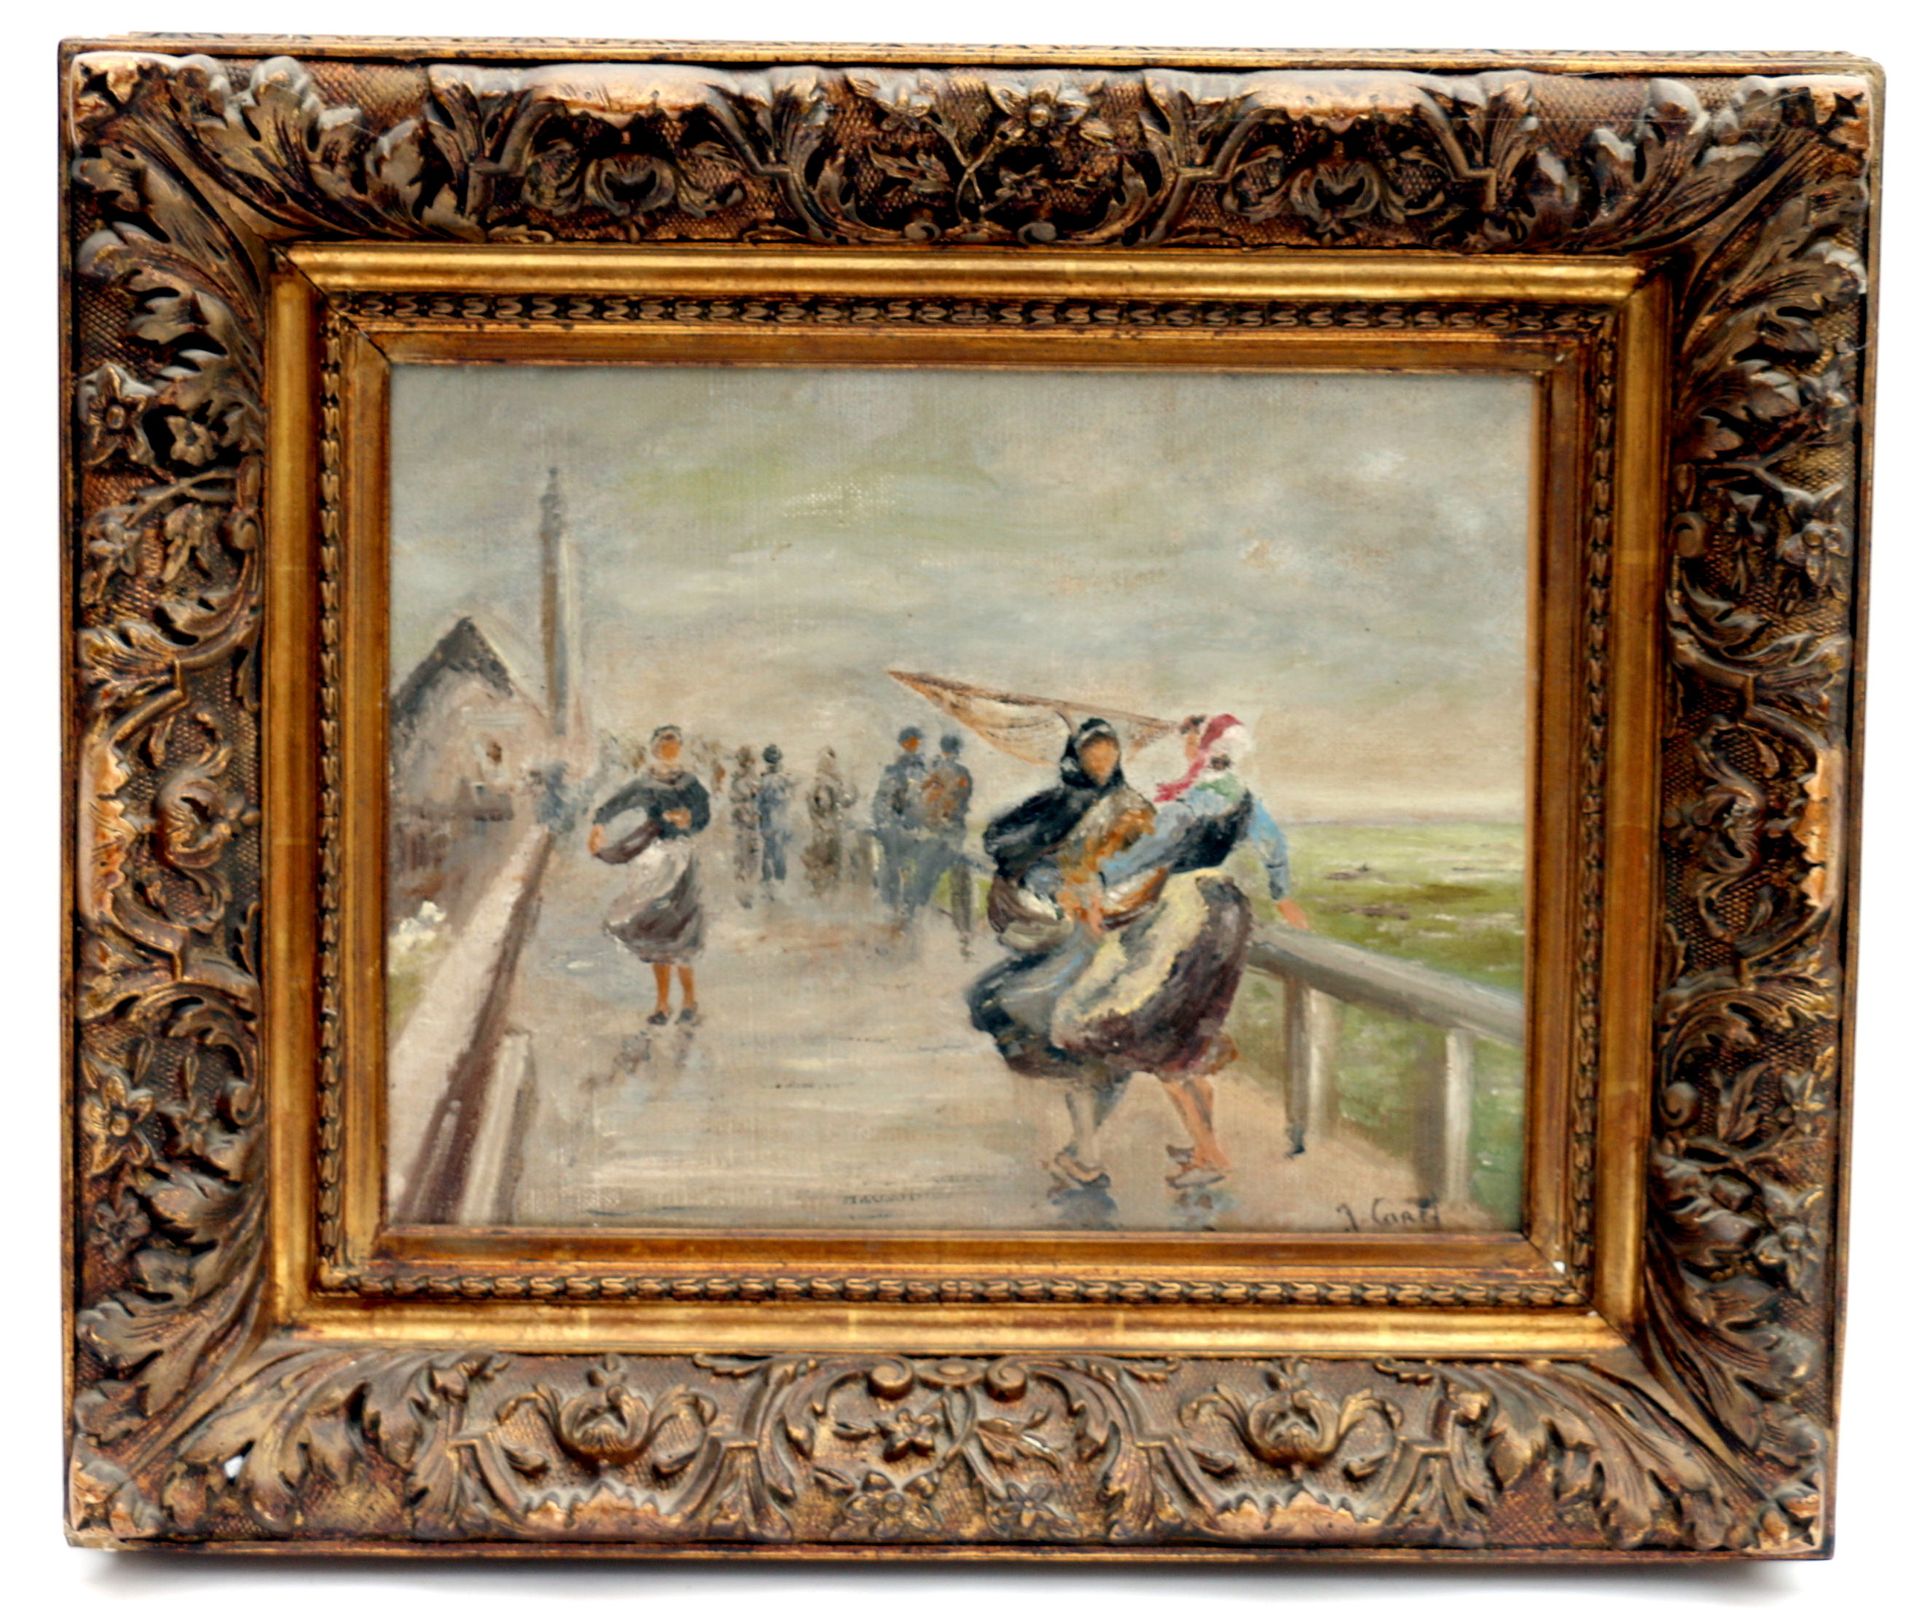 Null J.CAREL (?) "Return from fishing in Brittany" Hst, sbd. H 27 x 35 cm